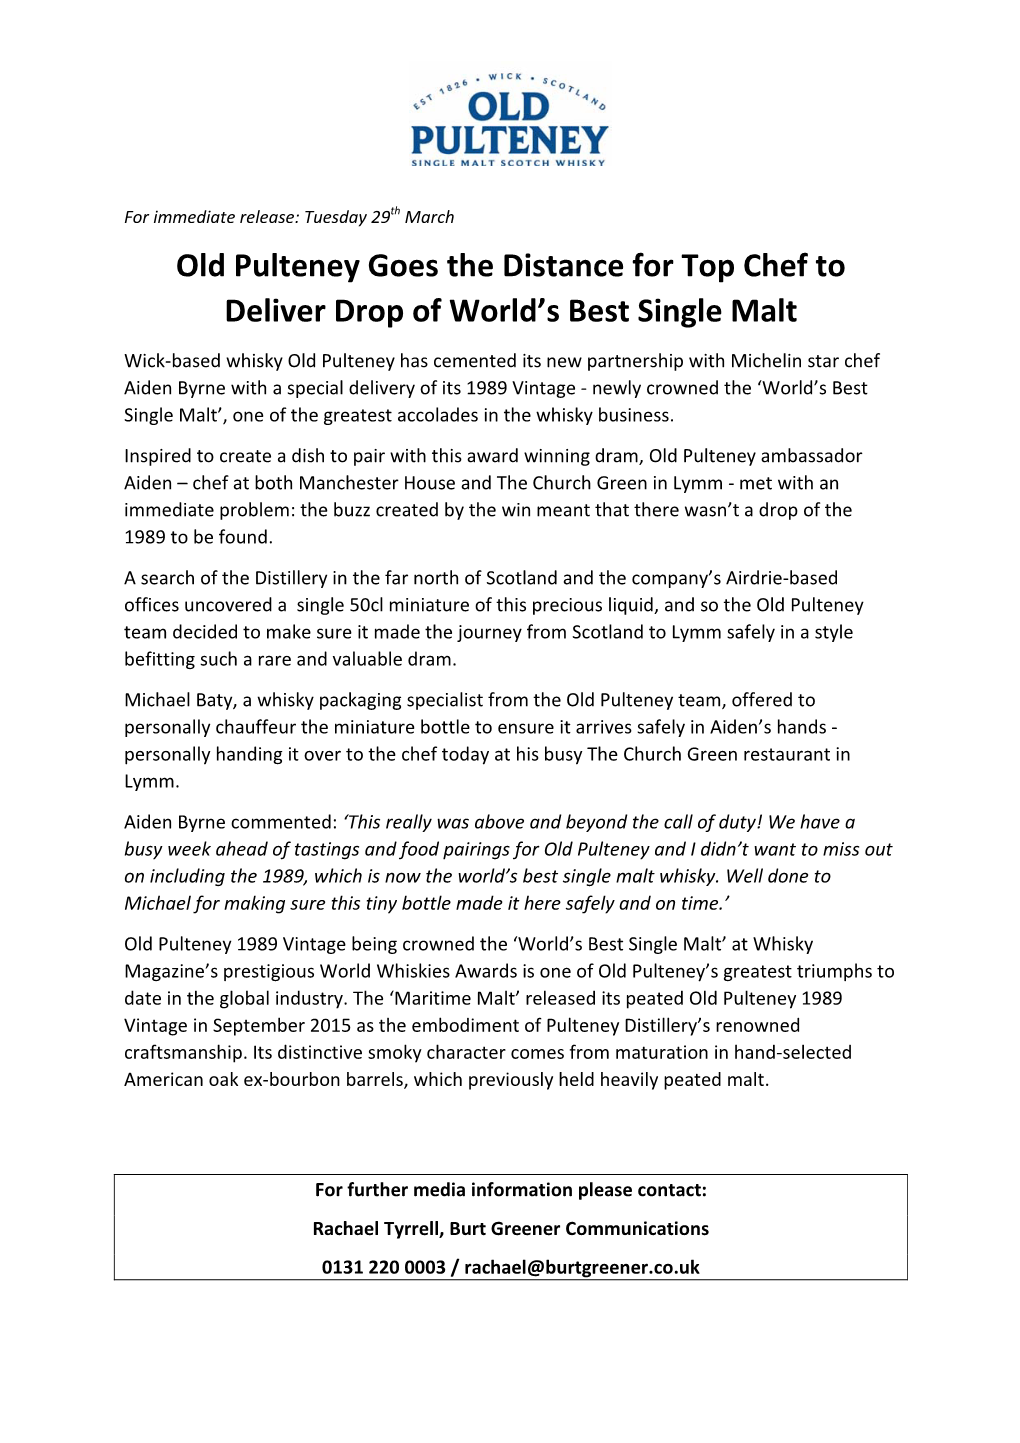 Old Pulteney Goes the Distance for Top Chef to Deliver Drop of World's